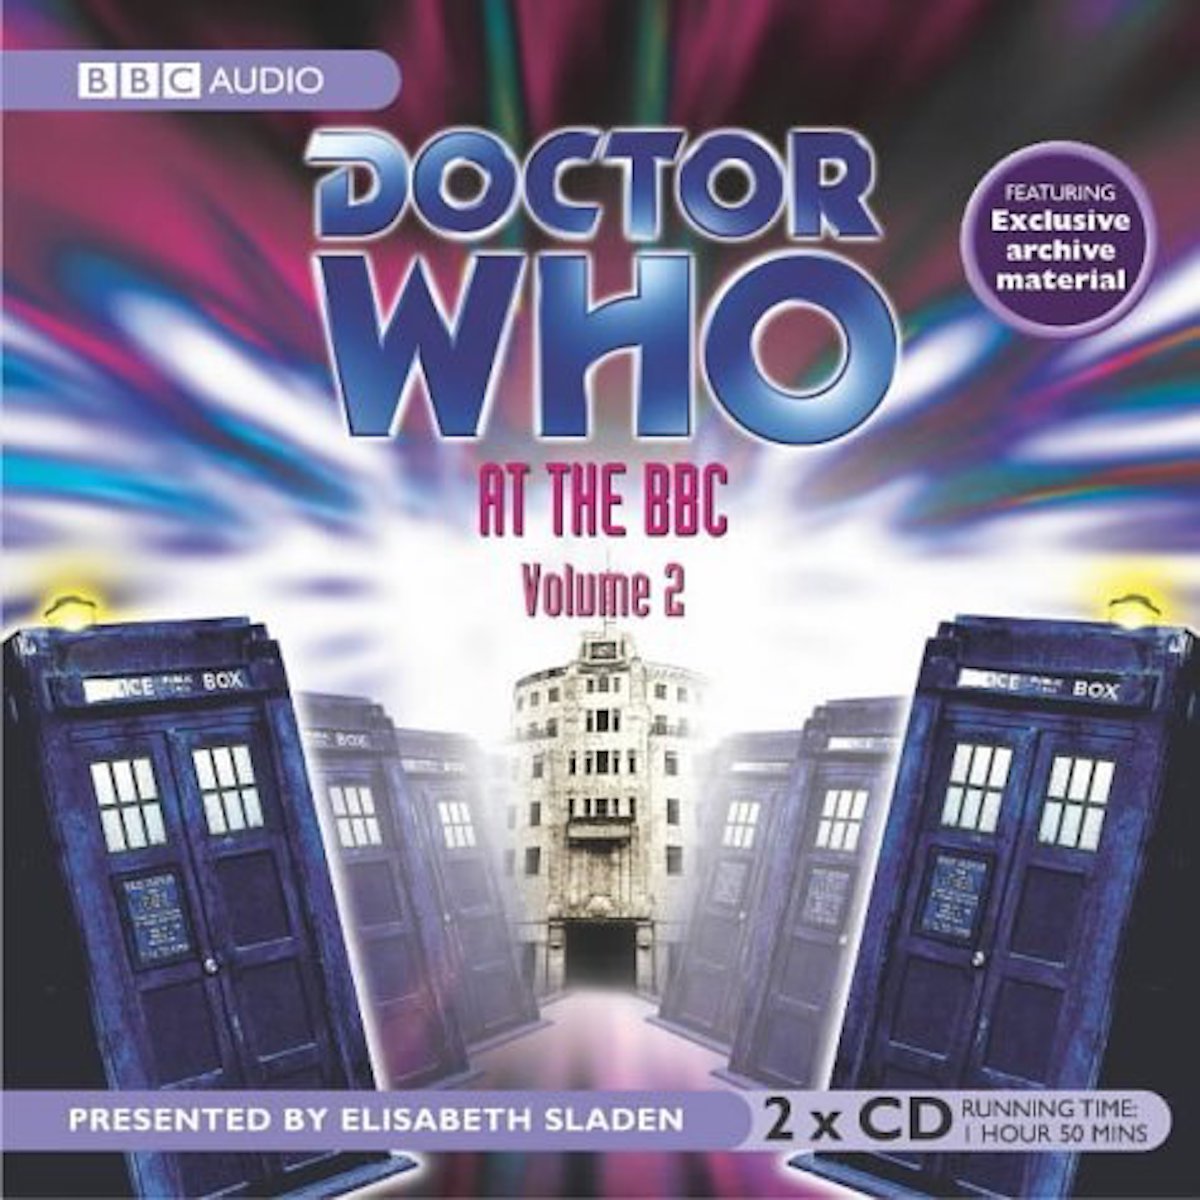 Doctor Who At The BBC Volume 2